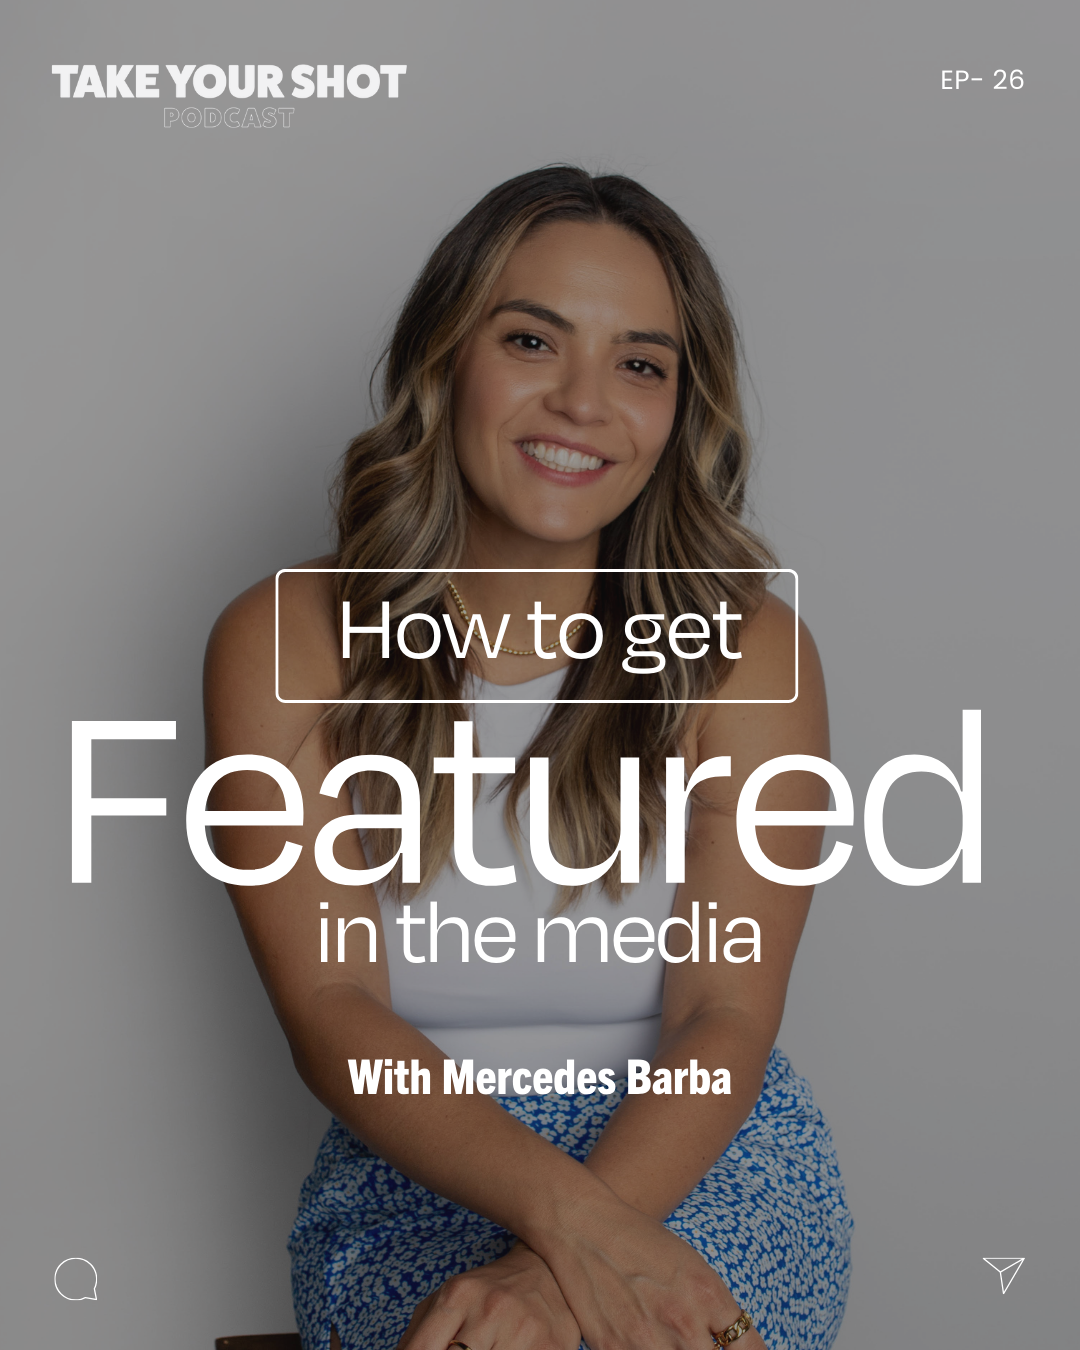 How to get featured in the media with Merceds Barba - a podcast guest who was a journalist for over 16 years helping small businesses get the media coverage they deserve.